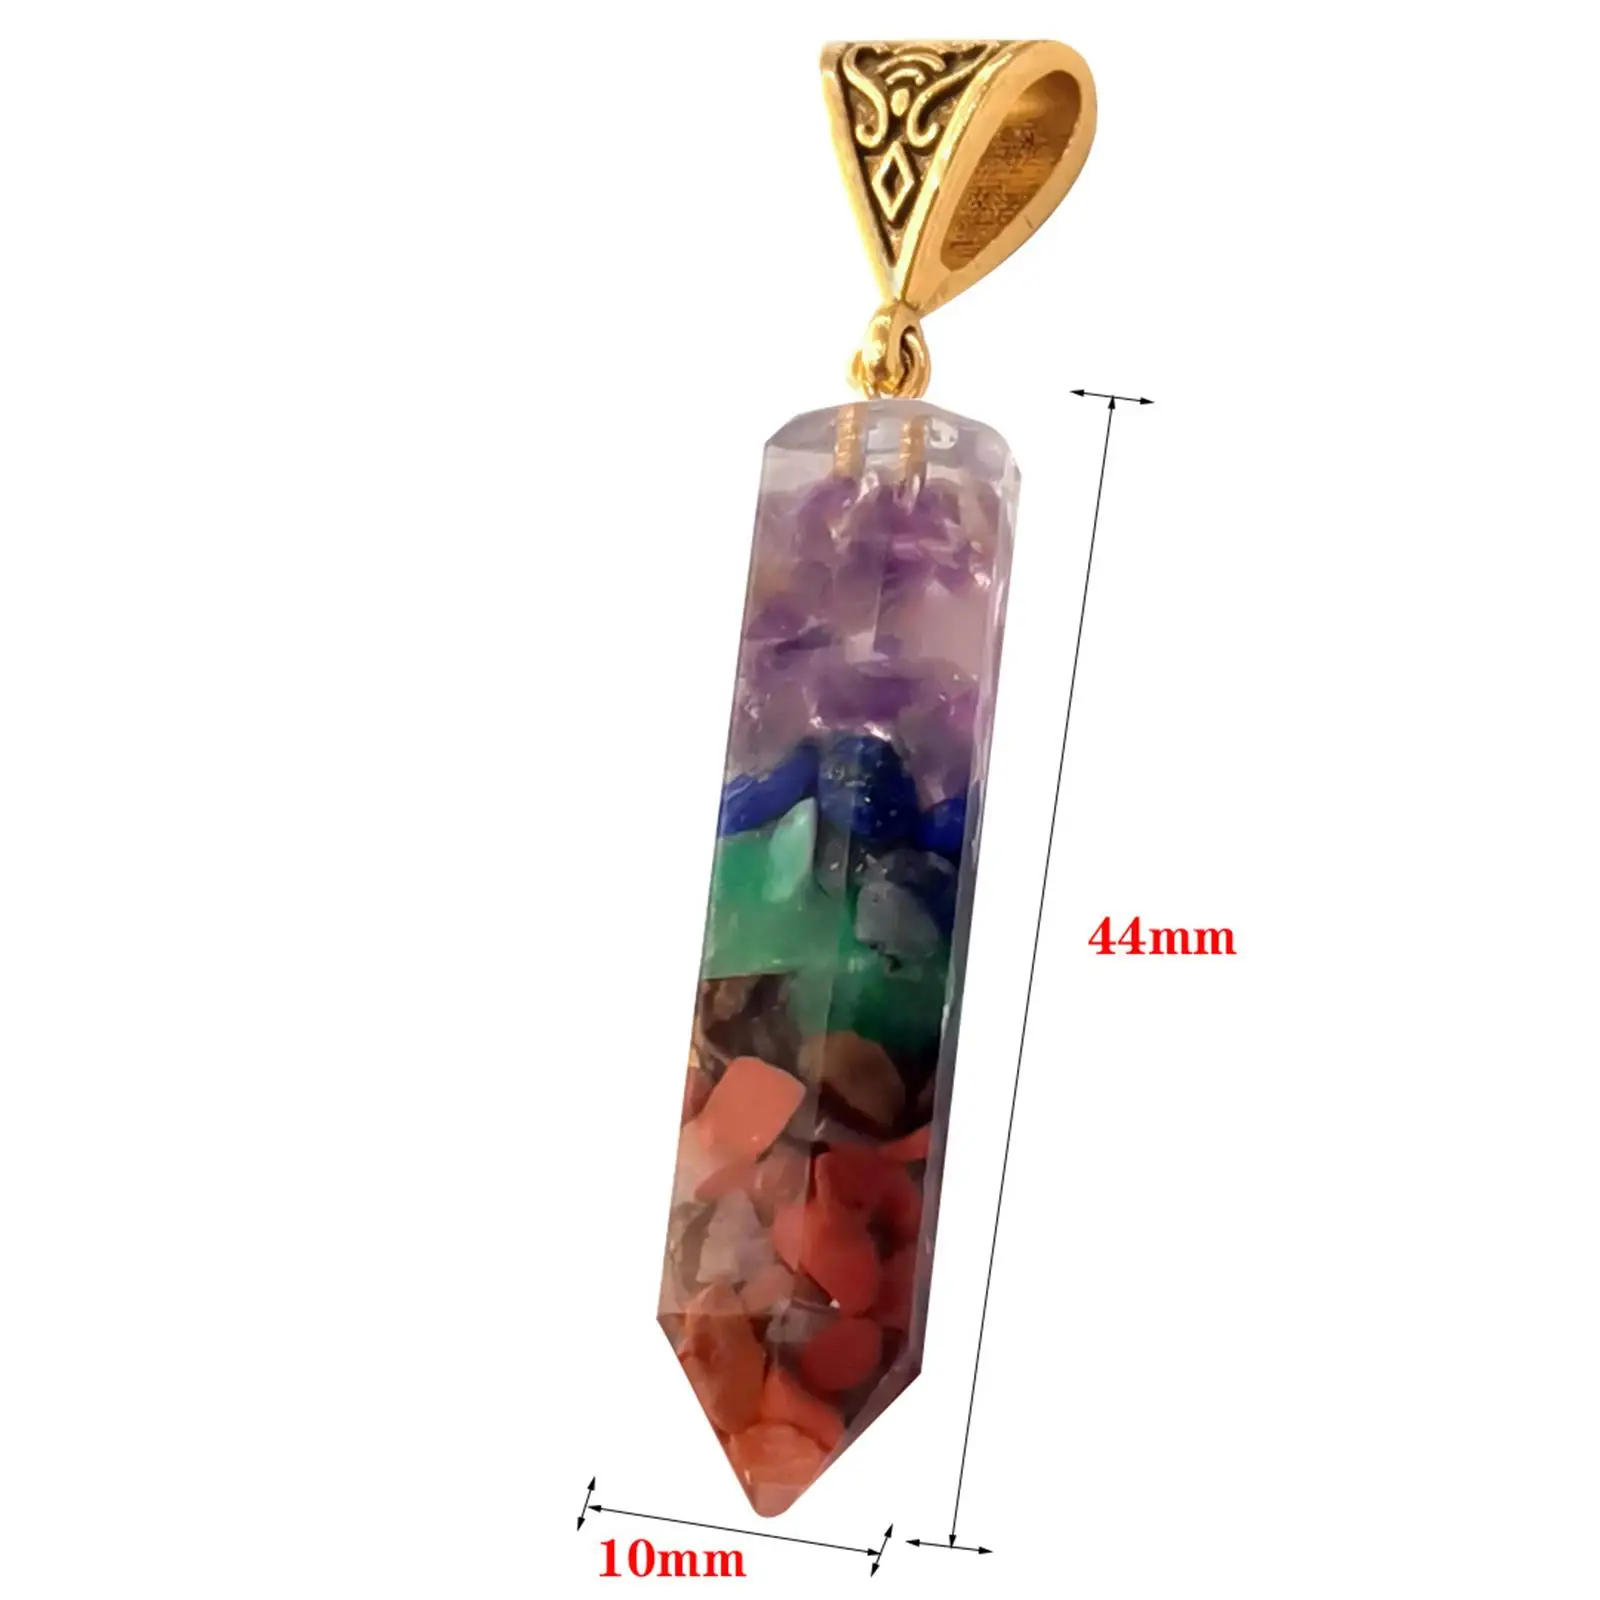 Hexagonal Necklace Irregular Antique Natural Jewelry Conical Shape Crystal Pendant for Thanksgiving Mom Men Girlfriend Wife